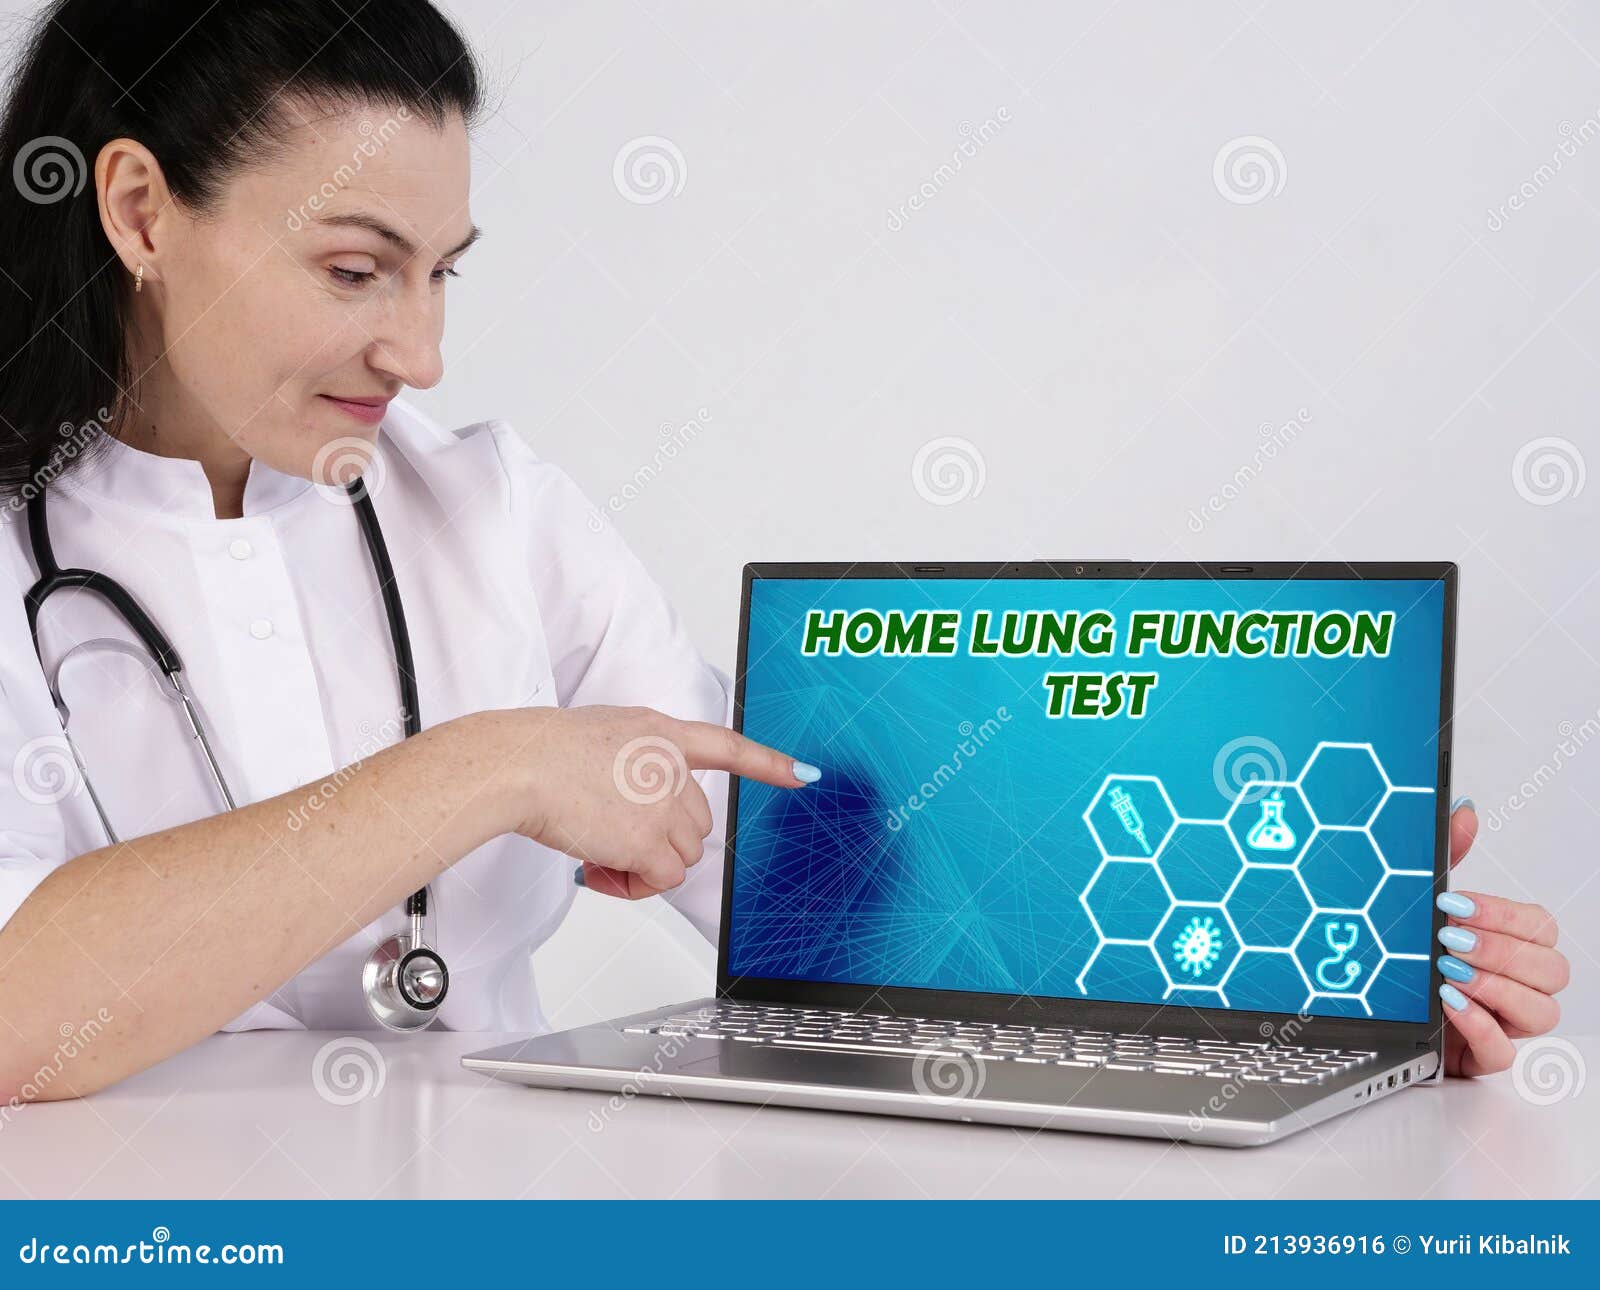 home lung function test phrase on the screen. medico use internet technologies at office